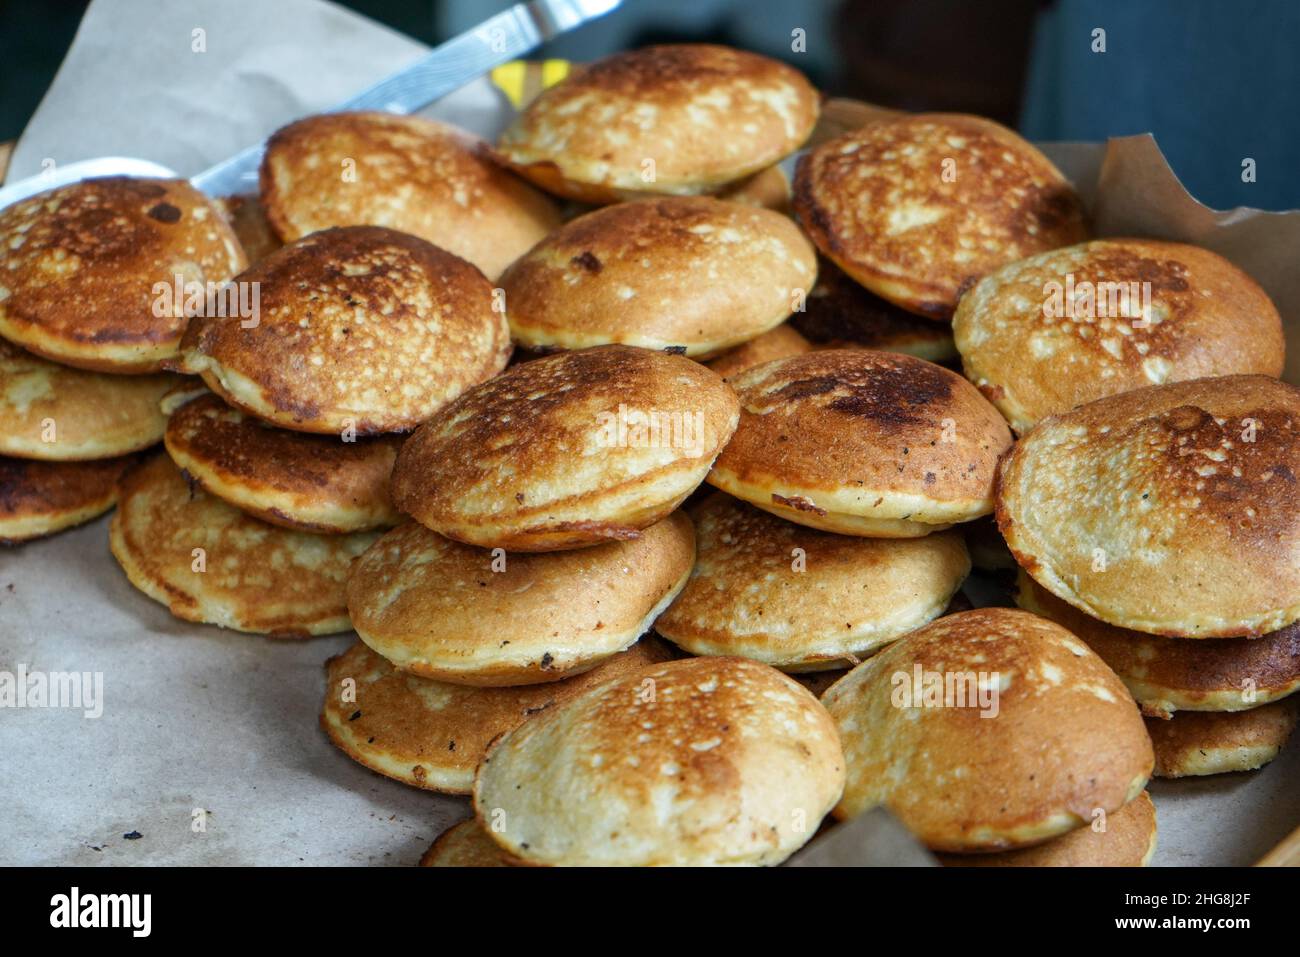 Appam is a type of pancake, originating from South India, made with fermented rice batter and coconut milk, common in Kerala Sri Lanka, Tamil Nadu. Stock Photo